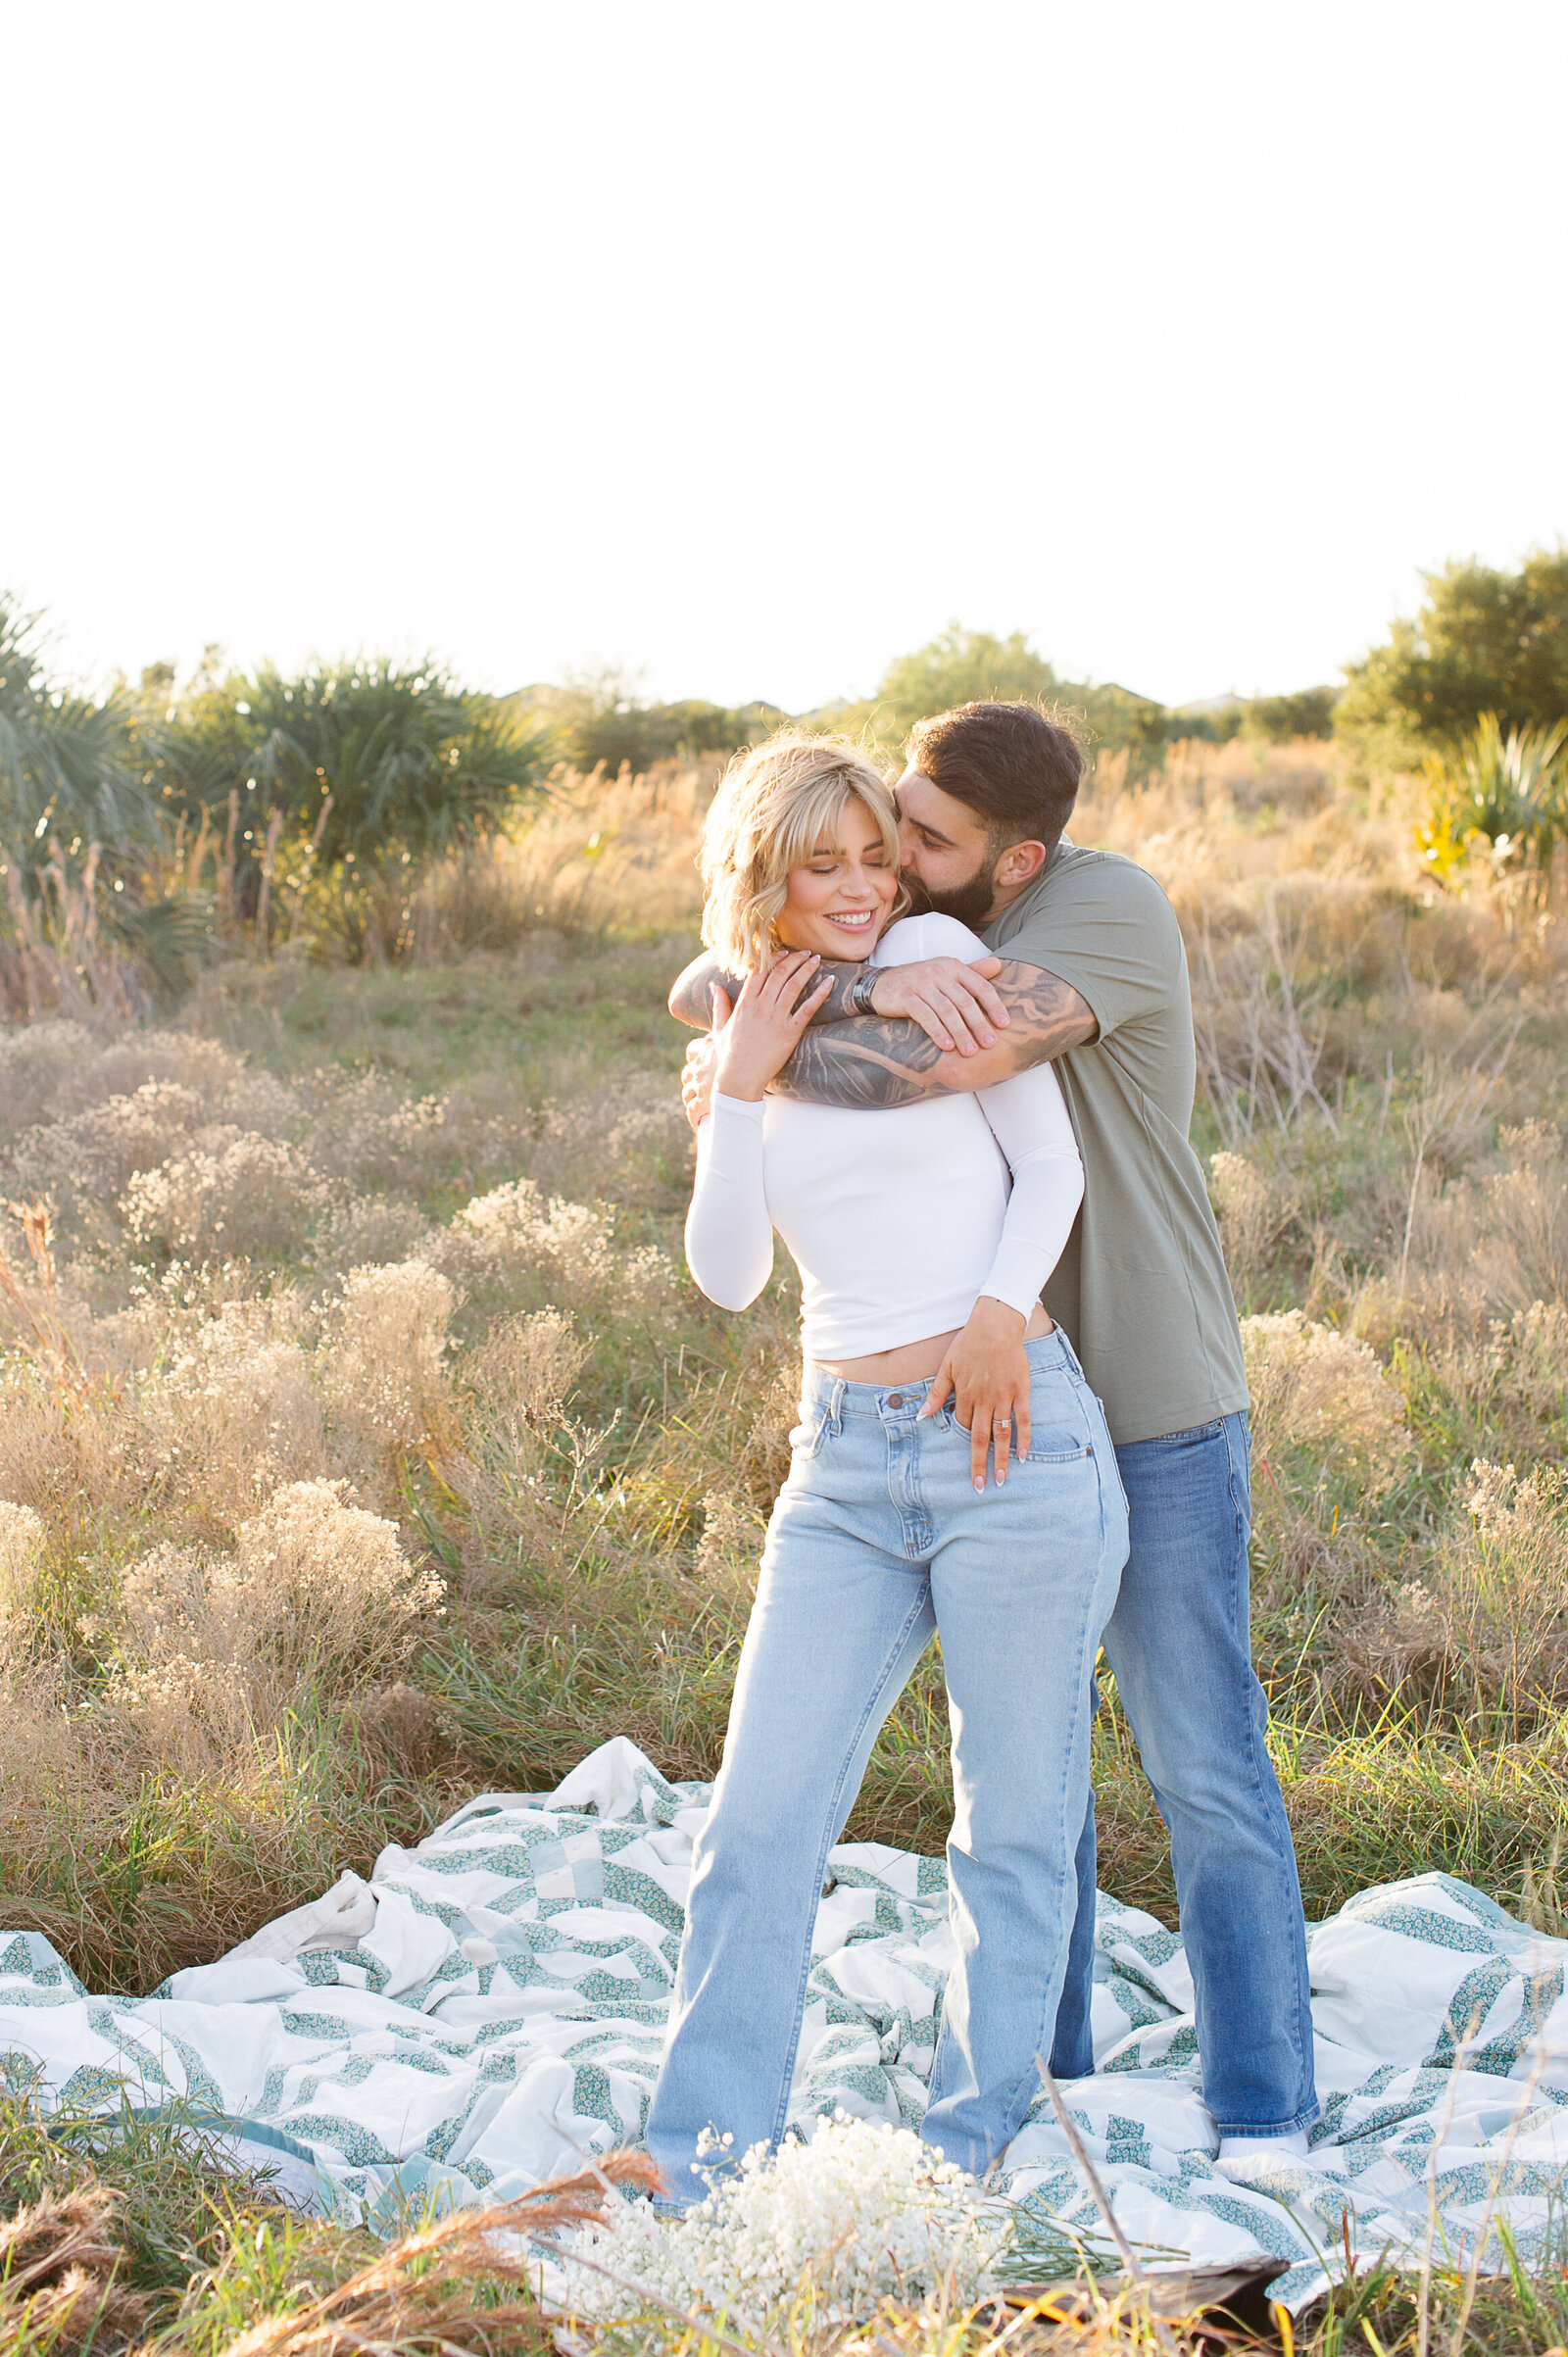 Newly engaged couple standing in a. field of tall pampas on a quilt while the man hugs the woman from behind and whispers in her ear